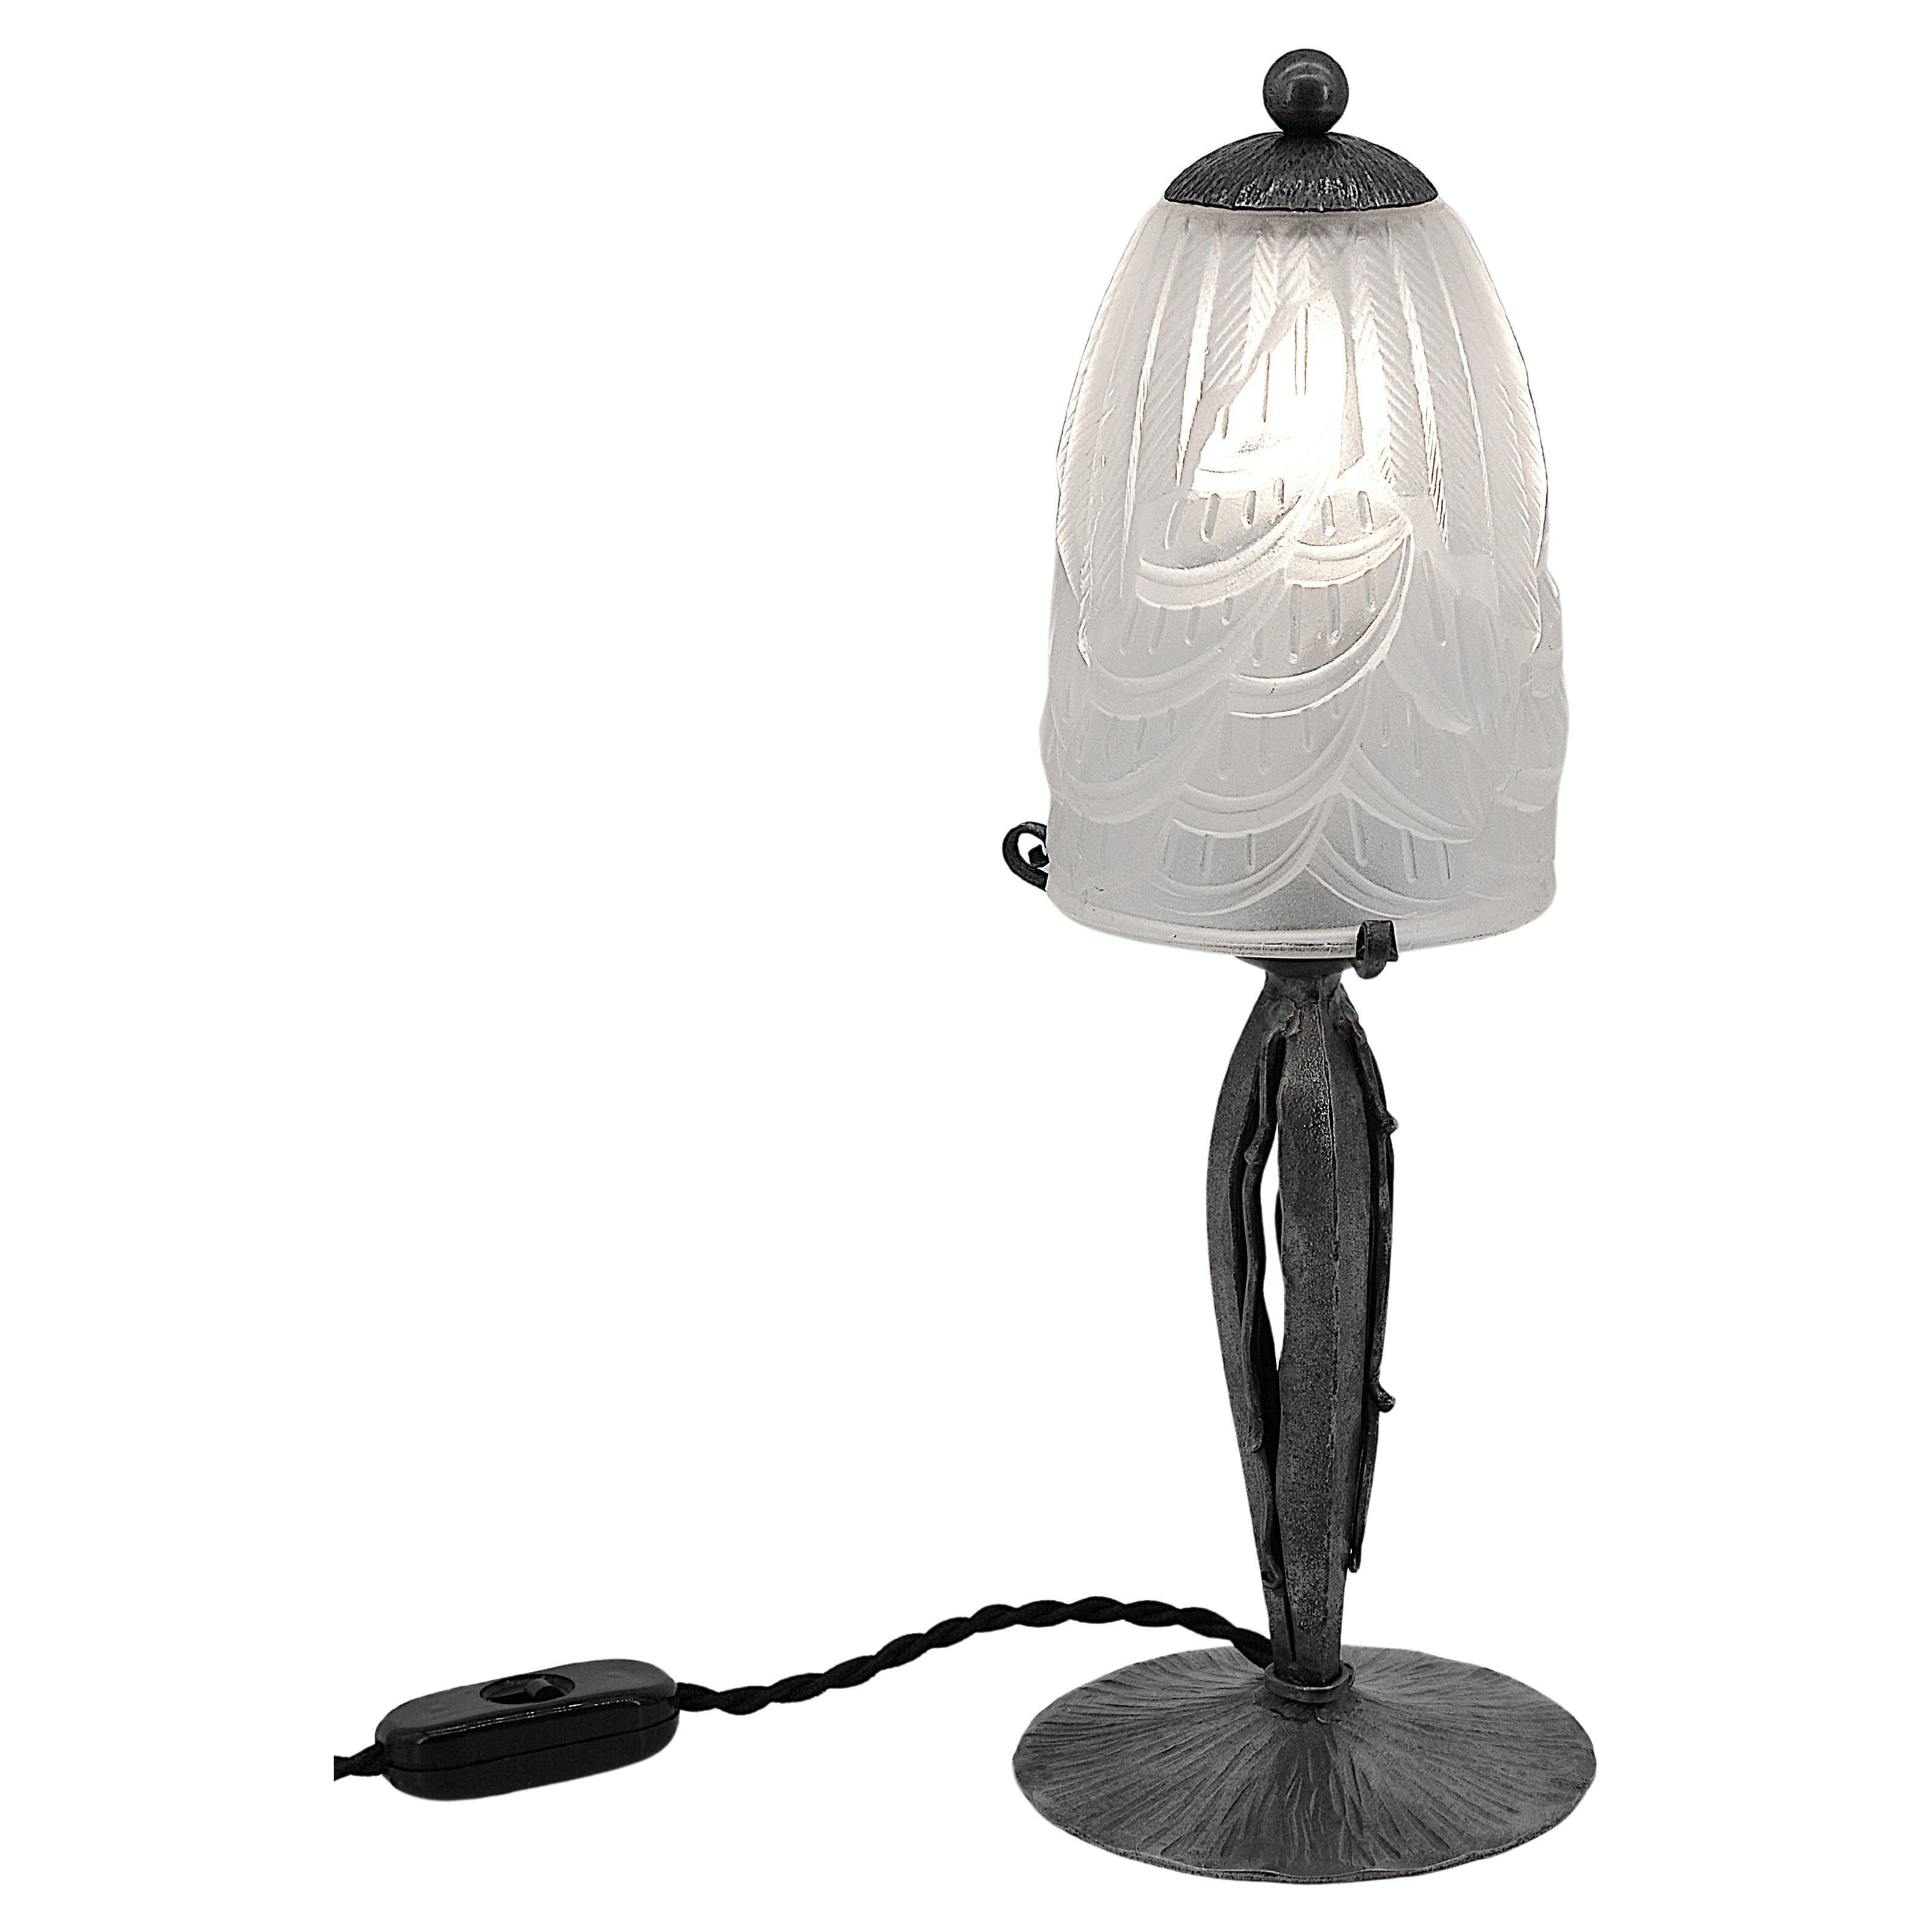 Charles Schneider French Art Deco Table Lamp, 1920 For Sale